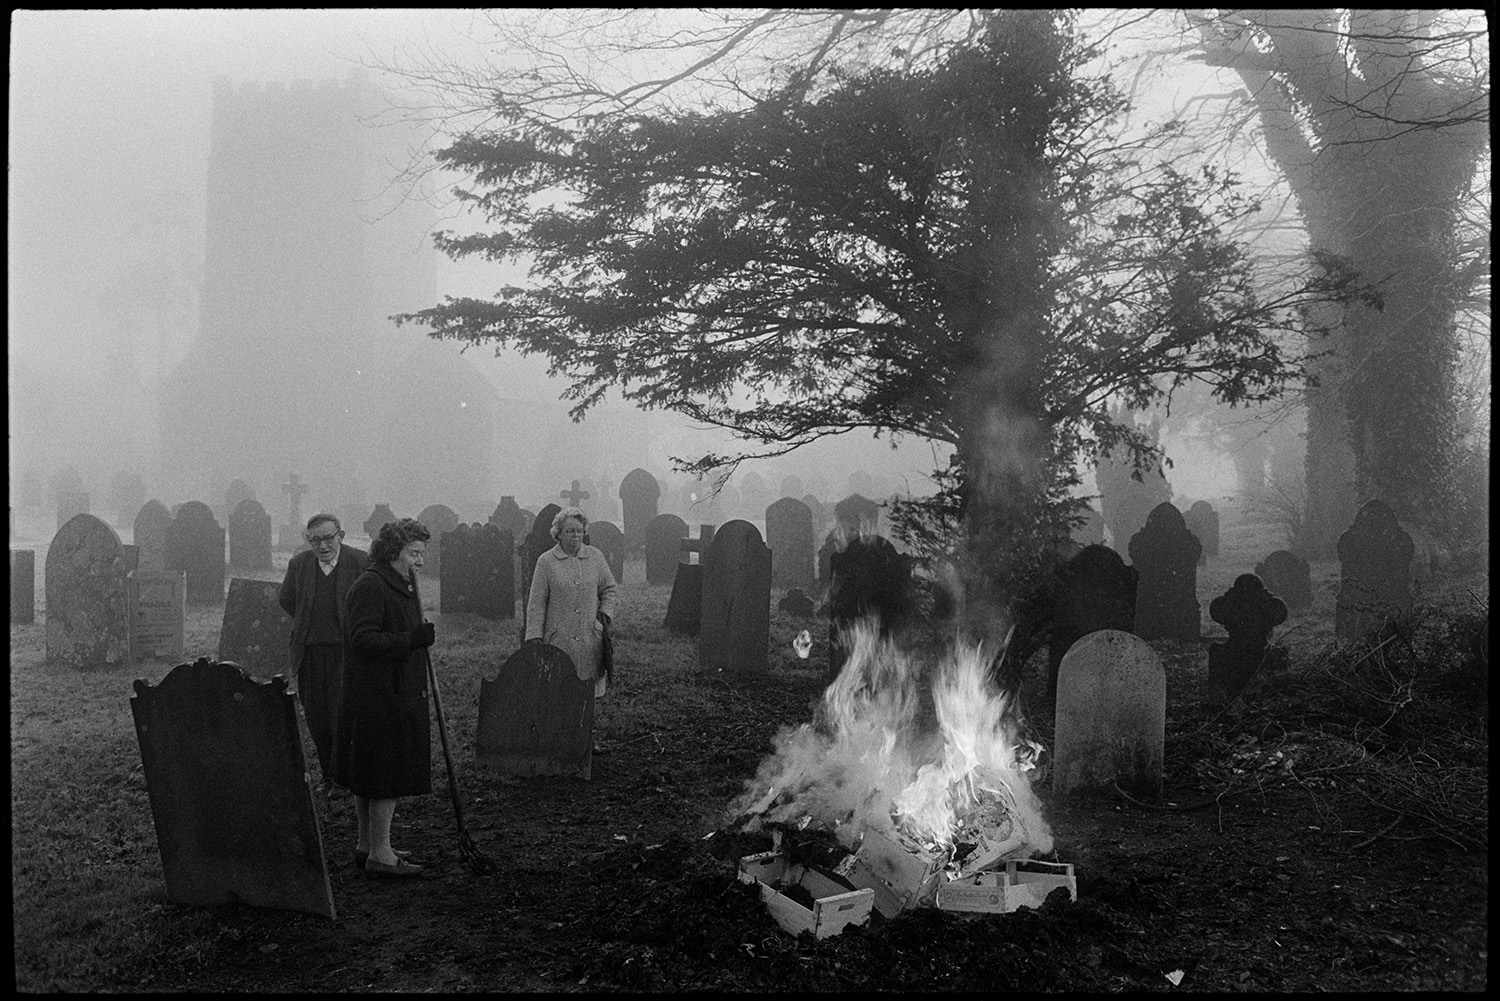 People burning rubbish from village stores on graveyard bonfire, misty church behind.
[Members of the Friend family standing by a bonfire in the misty churchyard at Dolton Church. They are burning rubbish from the village stores, including boxes. Gravestones and the church can be seen through the mist in the background.]